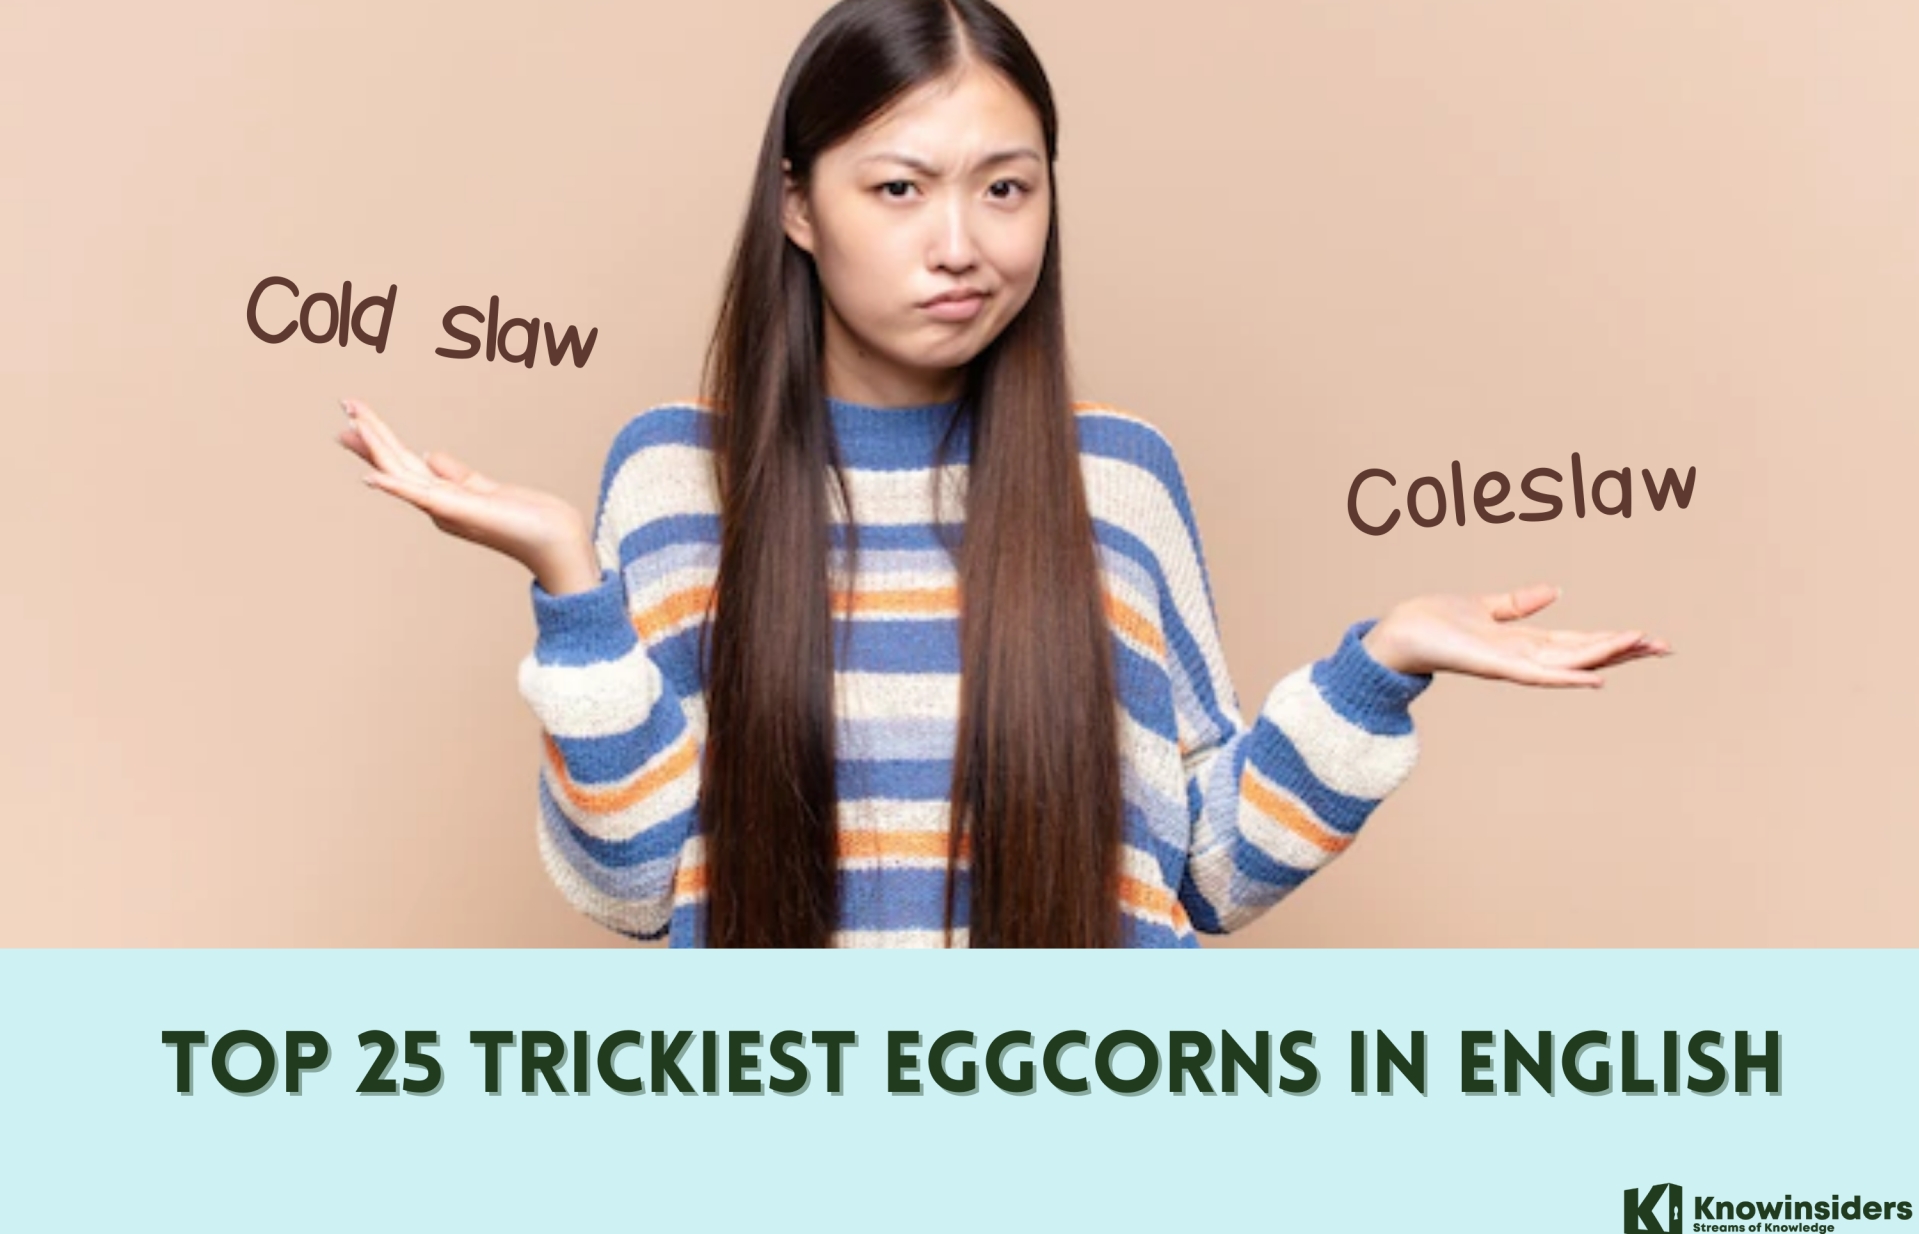 Top 25 Trickiest Eggcorns In The English Language